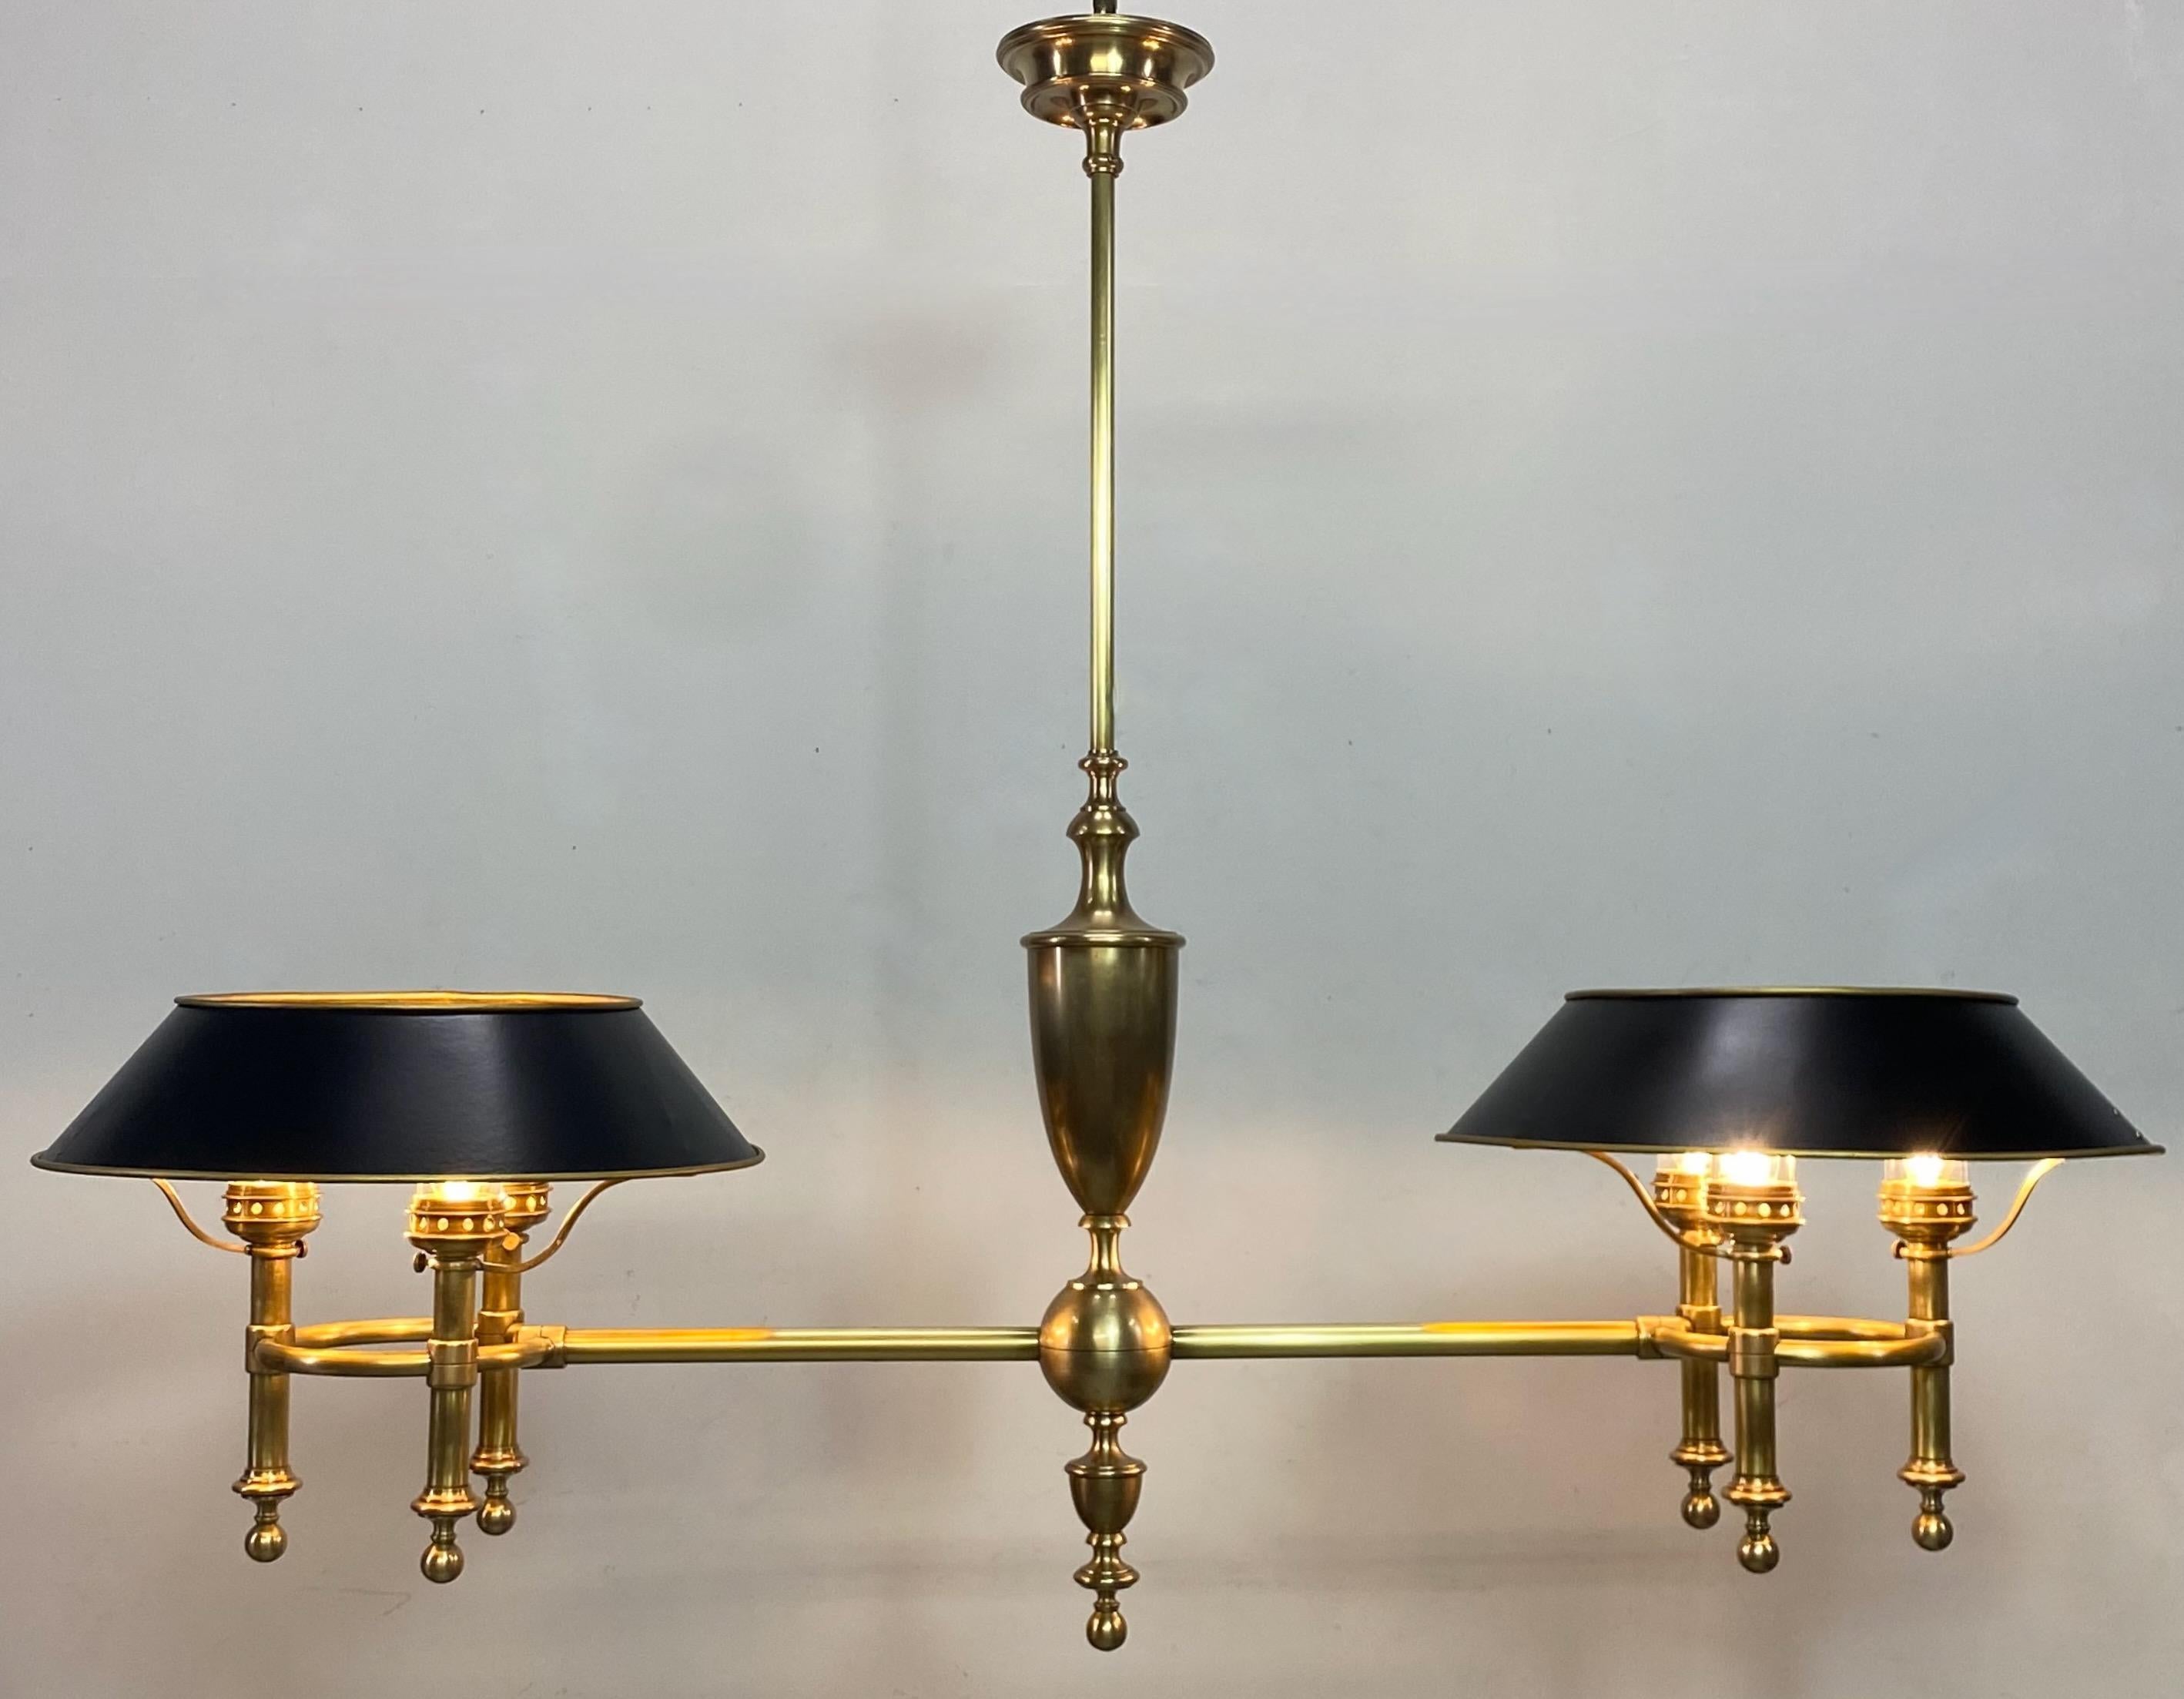 An extremely unusual antique solid brass billiard (pool) table light fixture that would look perfect to hang over a kitchen island as well.
Originally was a gas light, now converted to electric.
This has been fully disassembled and cleaned,